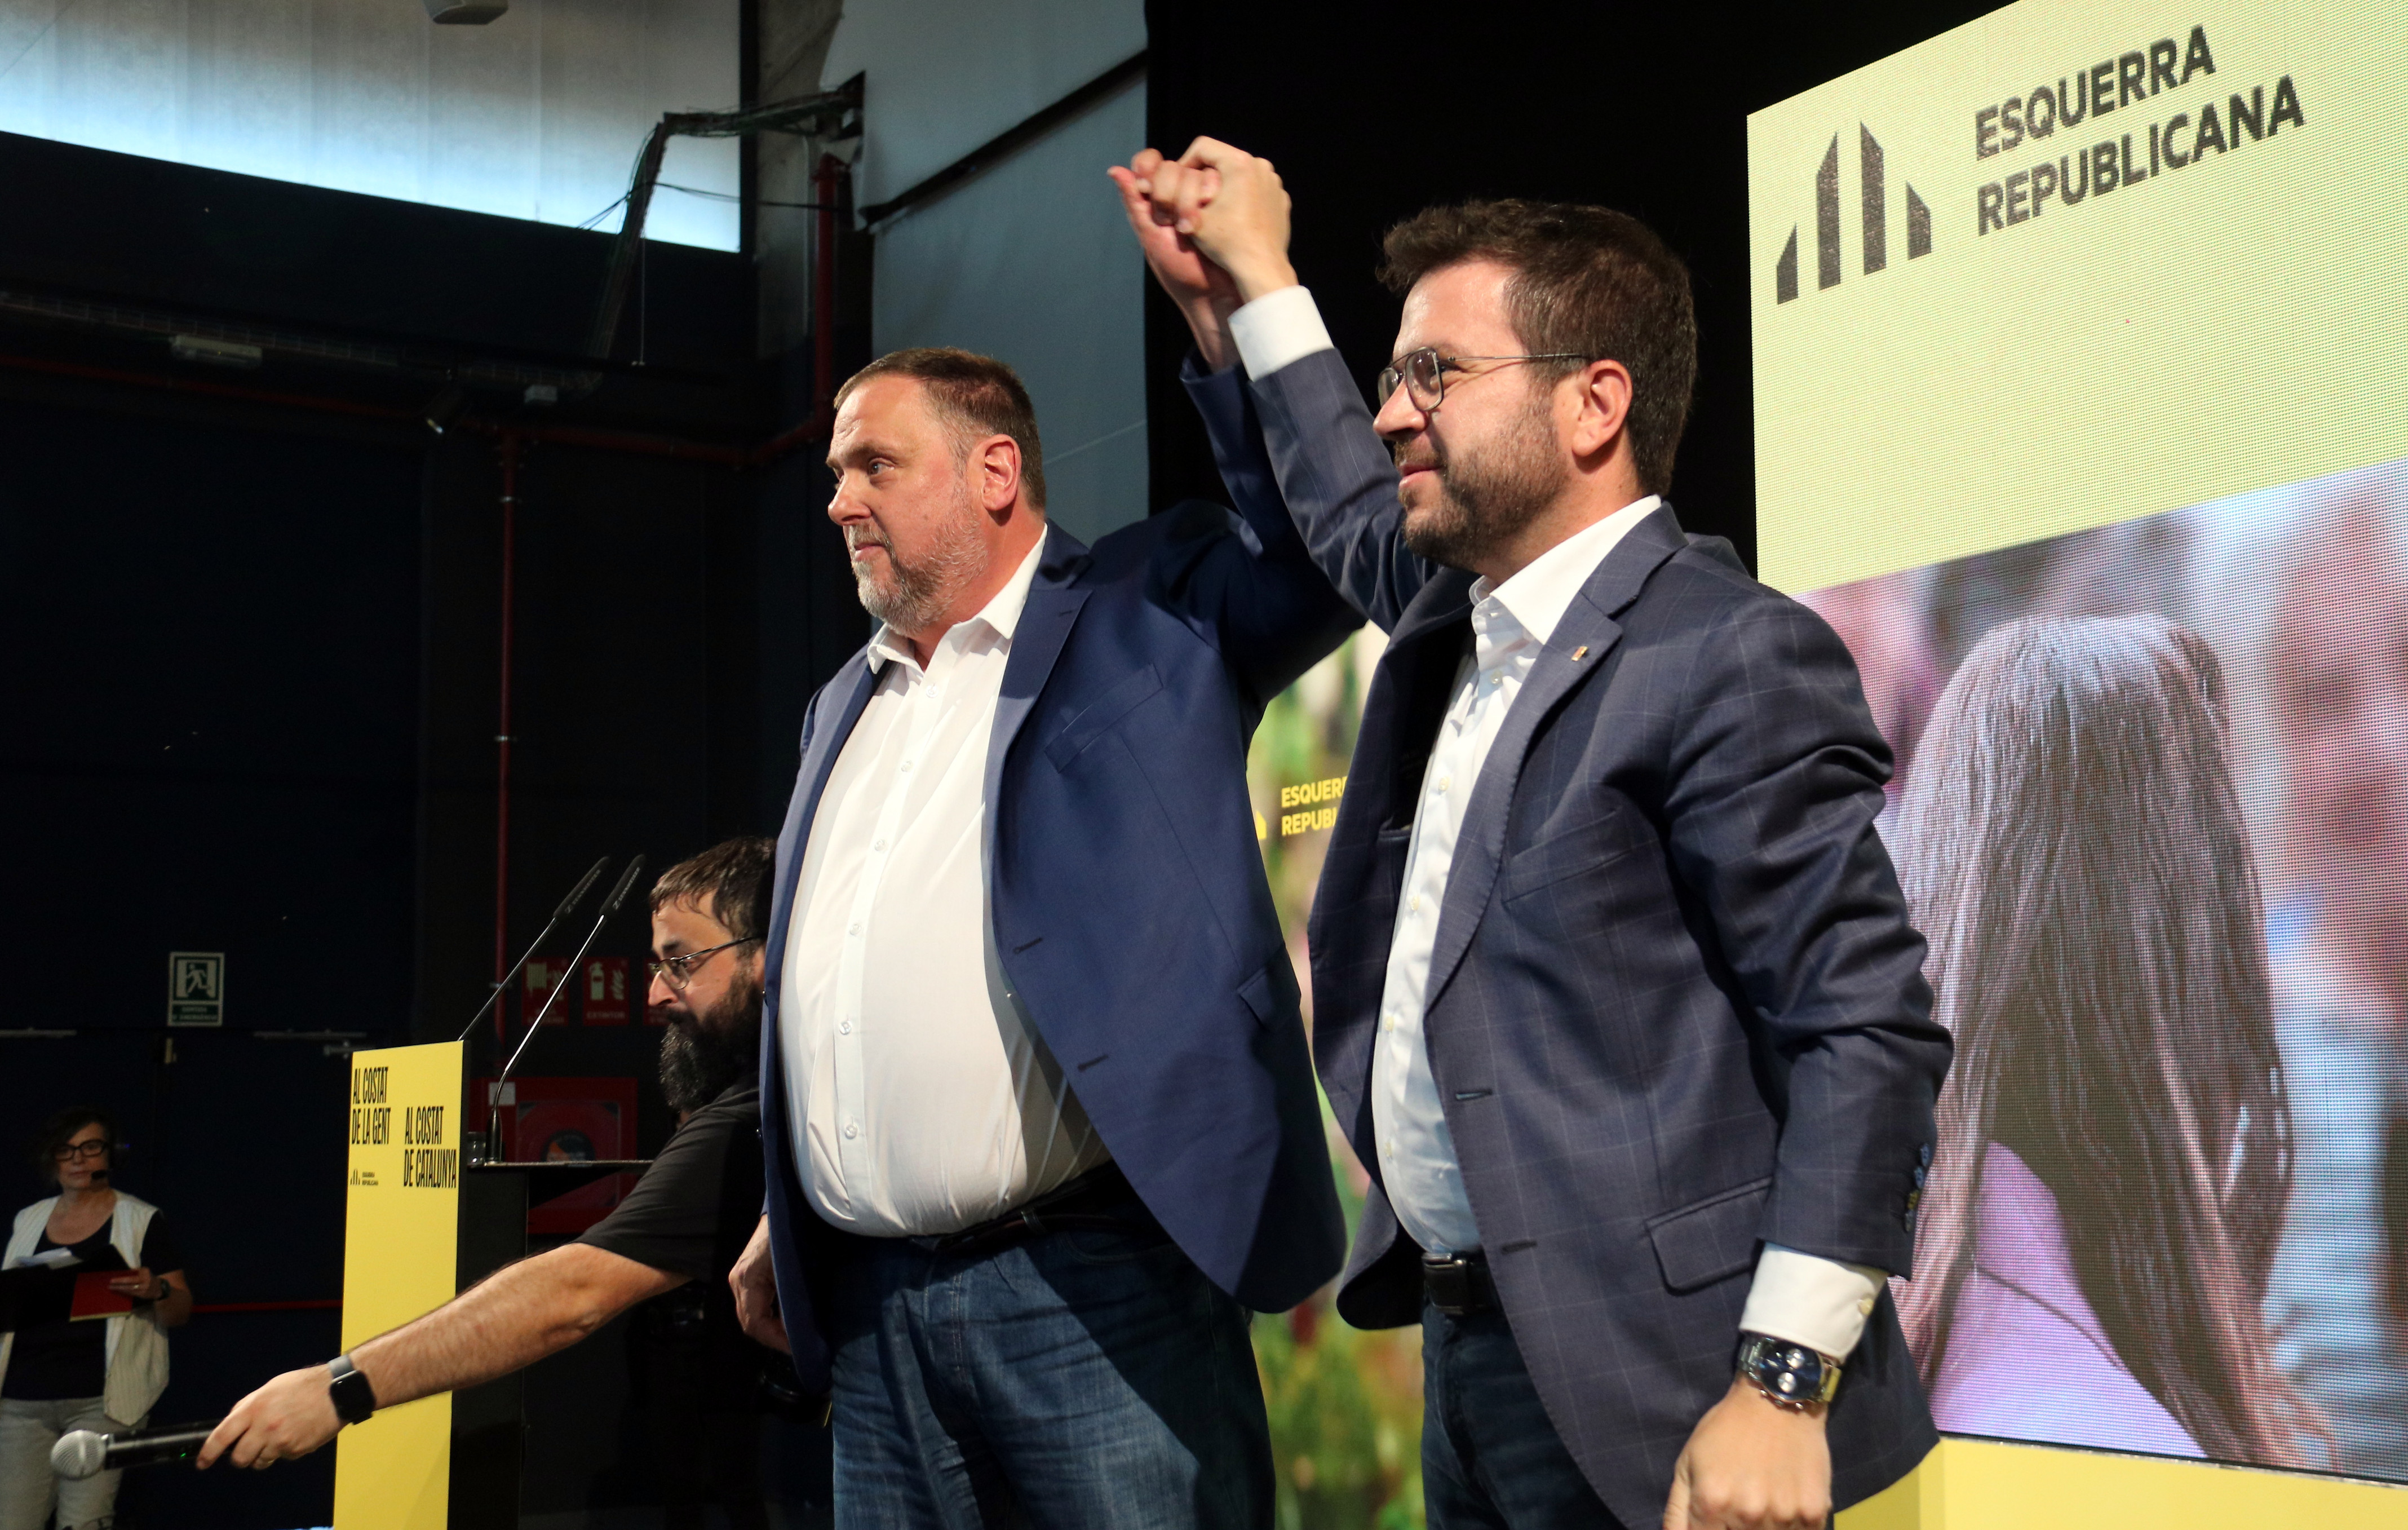 Esquerra president Oriol Junqueras and candidate to the Catalan election Pere Aragonès during an election campaign event ahead of the May 12 ballot in Tarragona